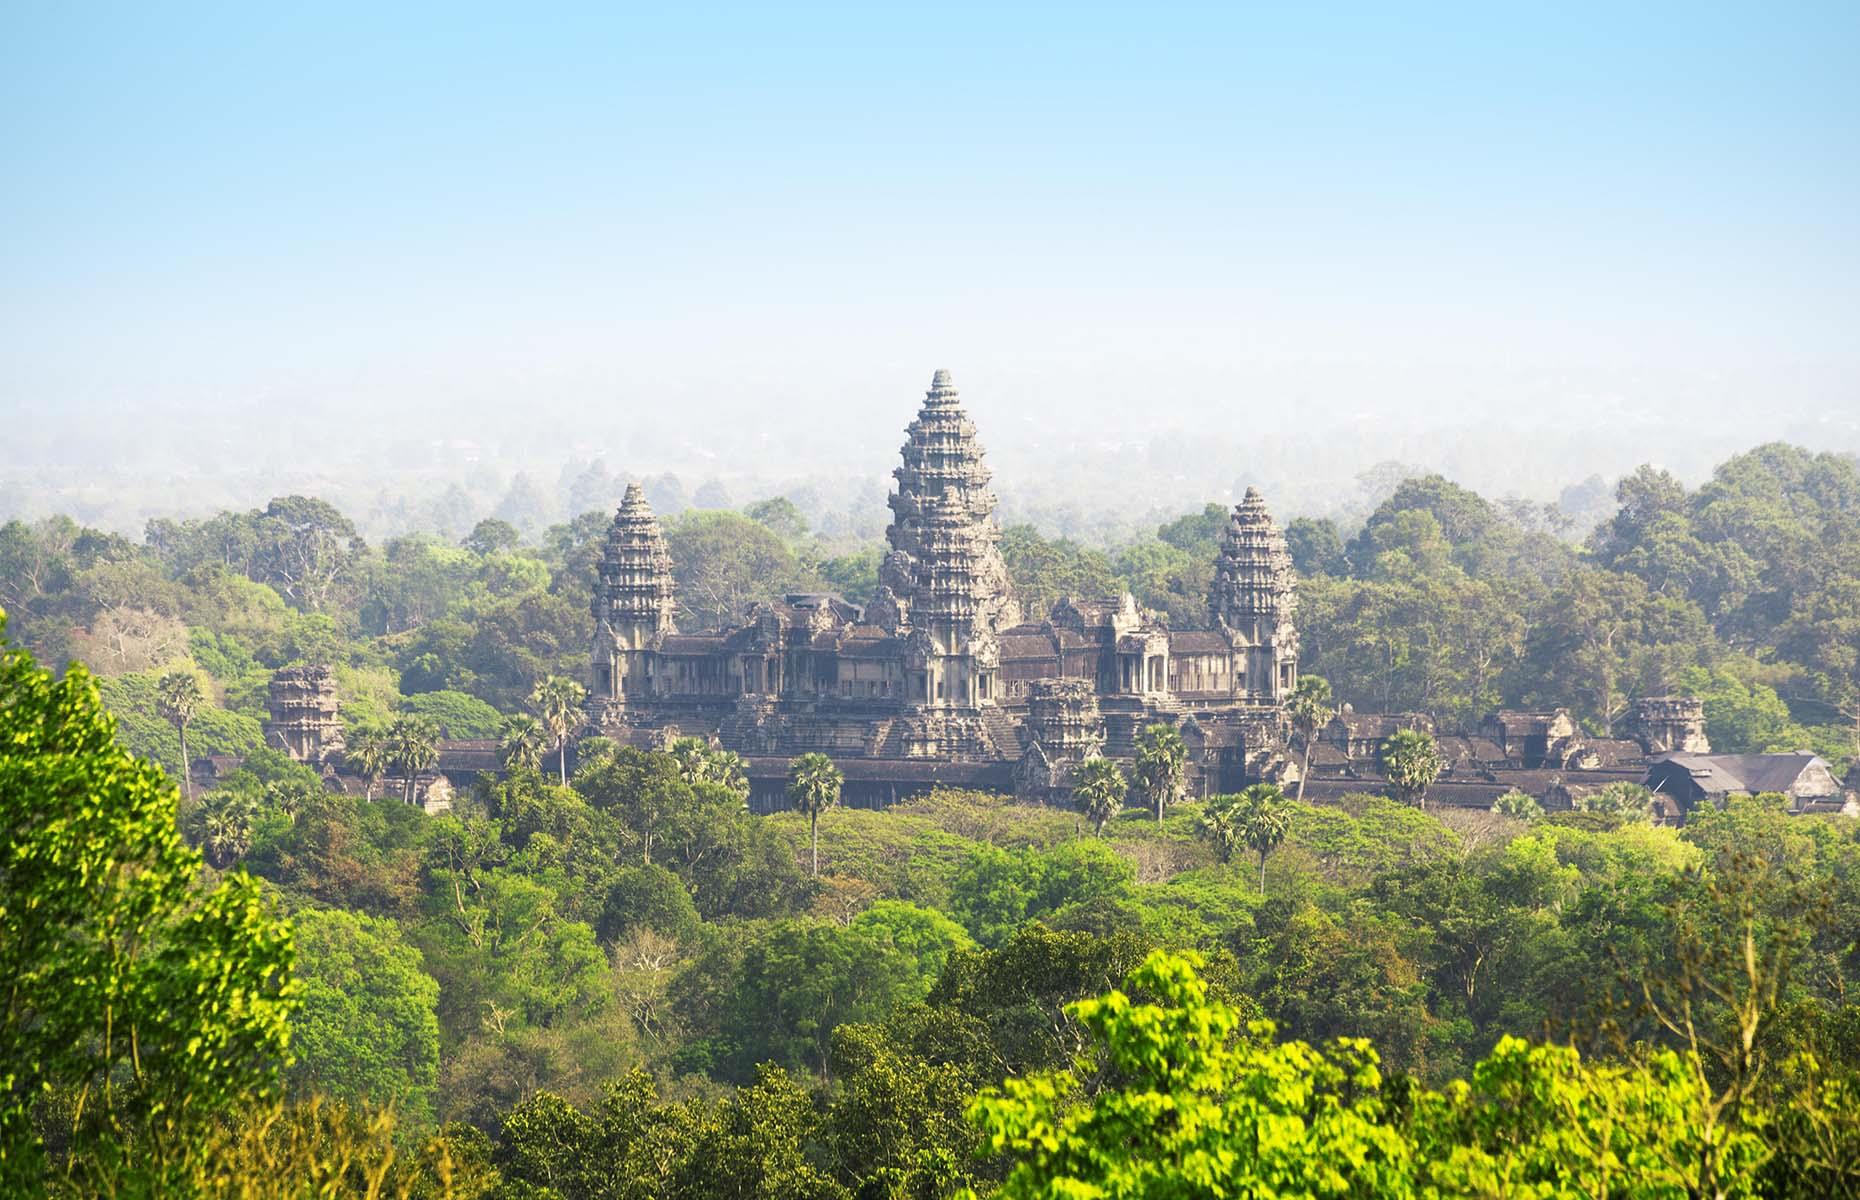 Cambodia's famous lost jungle city is among the most incredible and largest archaeological sites on Earth. The majestic temples and monuments of Angkor were built between the 9th and 14th centuries, when the Khmer civilisation was at the height of its power. The largest and most famous temple in the sprawling complex is majestic Angkor Wat.